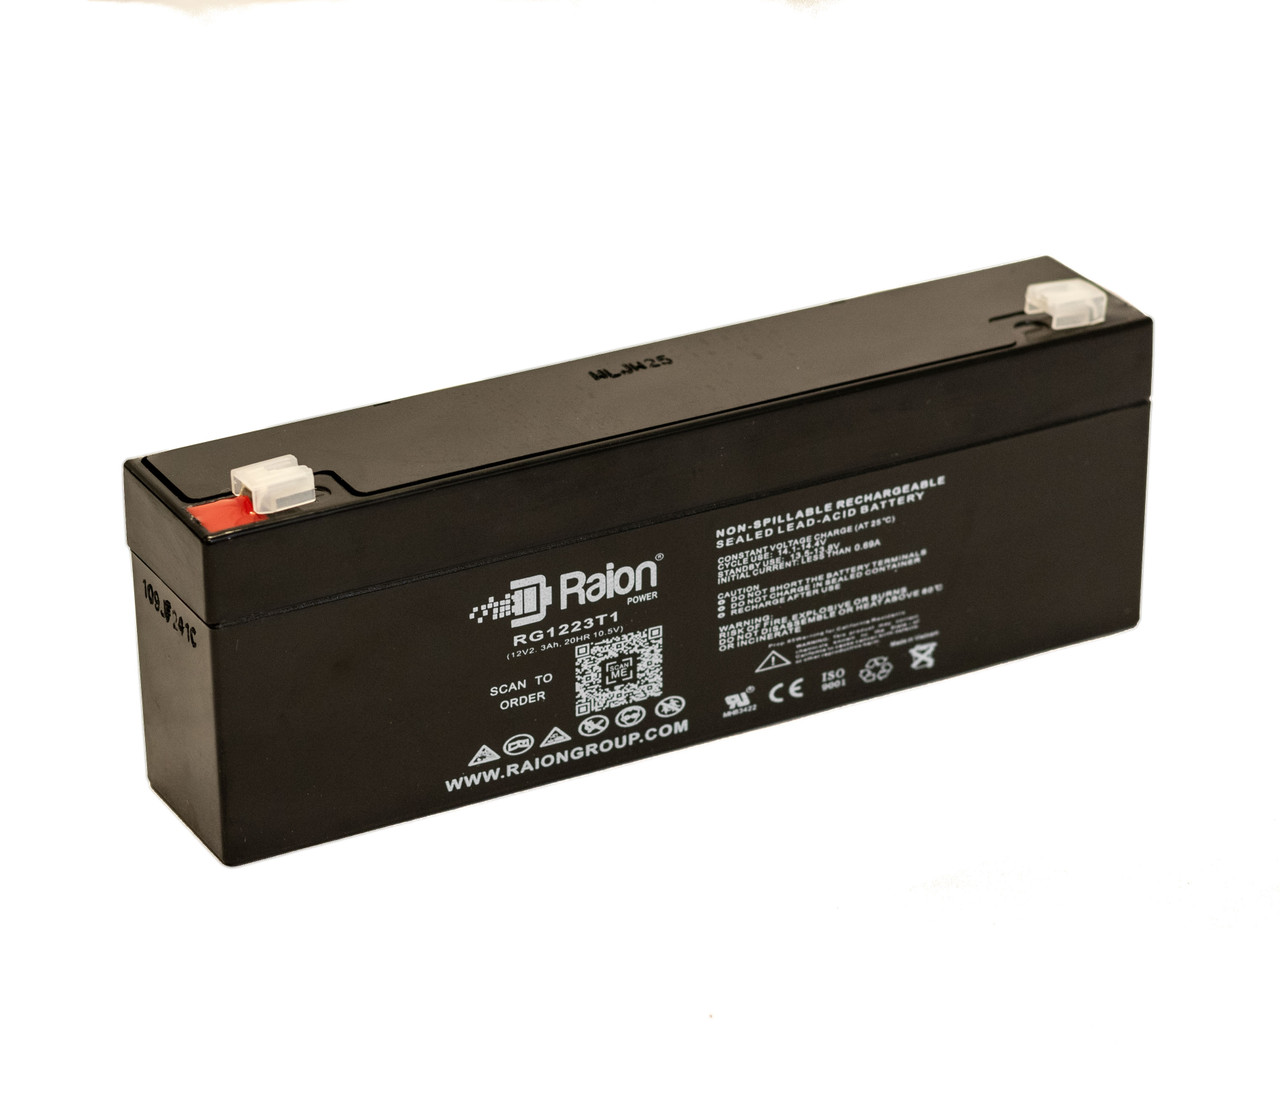 Raion Power RG1223T1 Replacement Battery for Spacelabs Medical PC System Printer